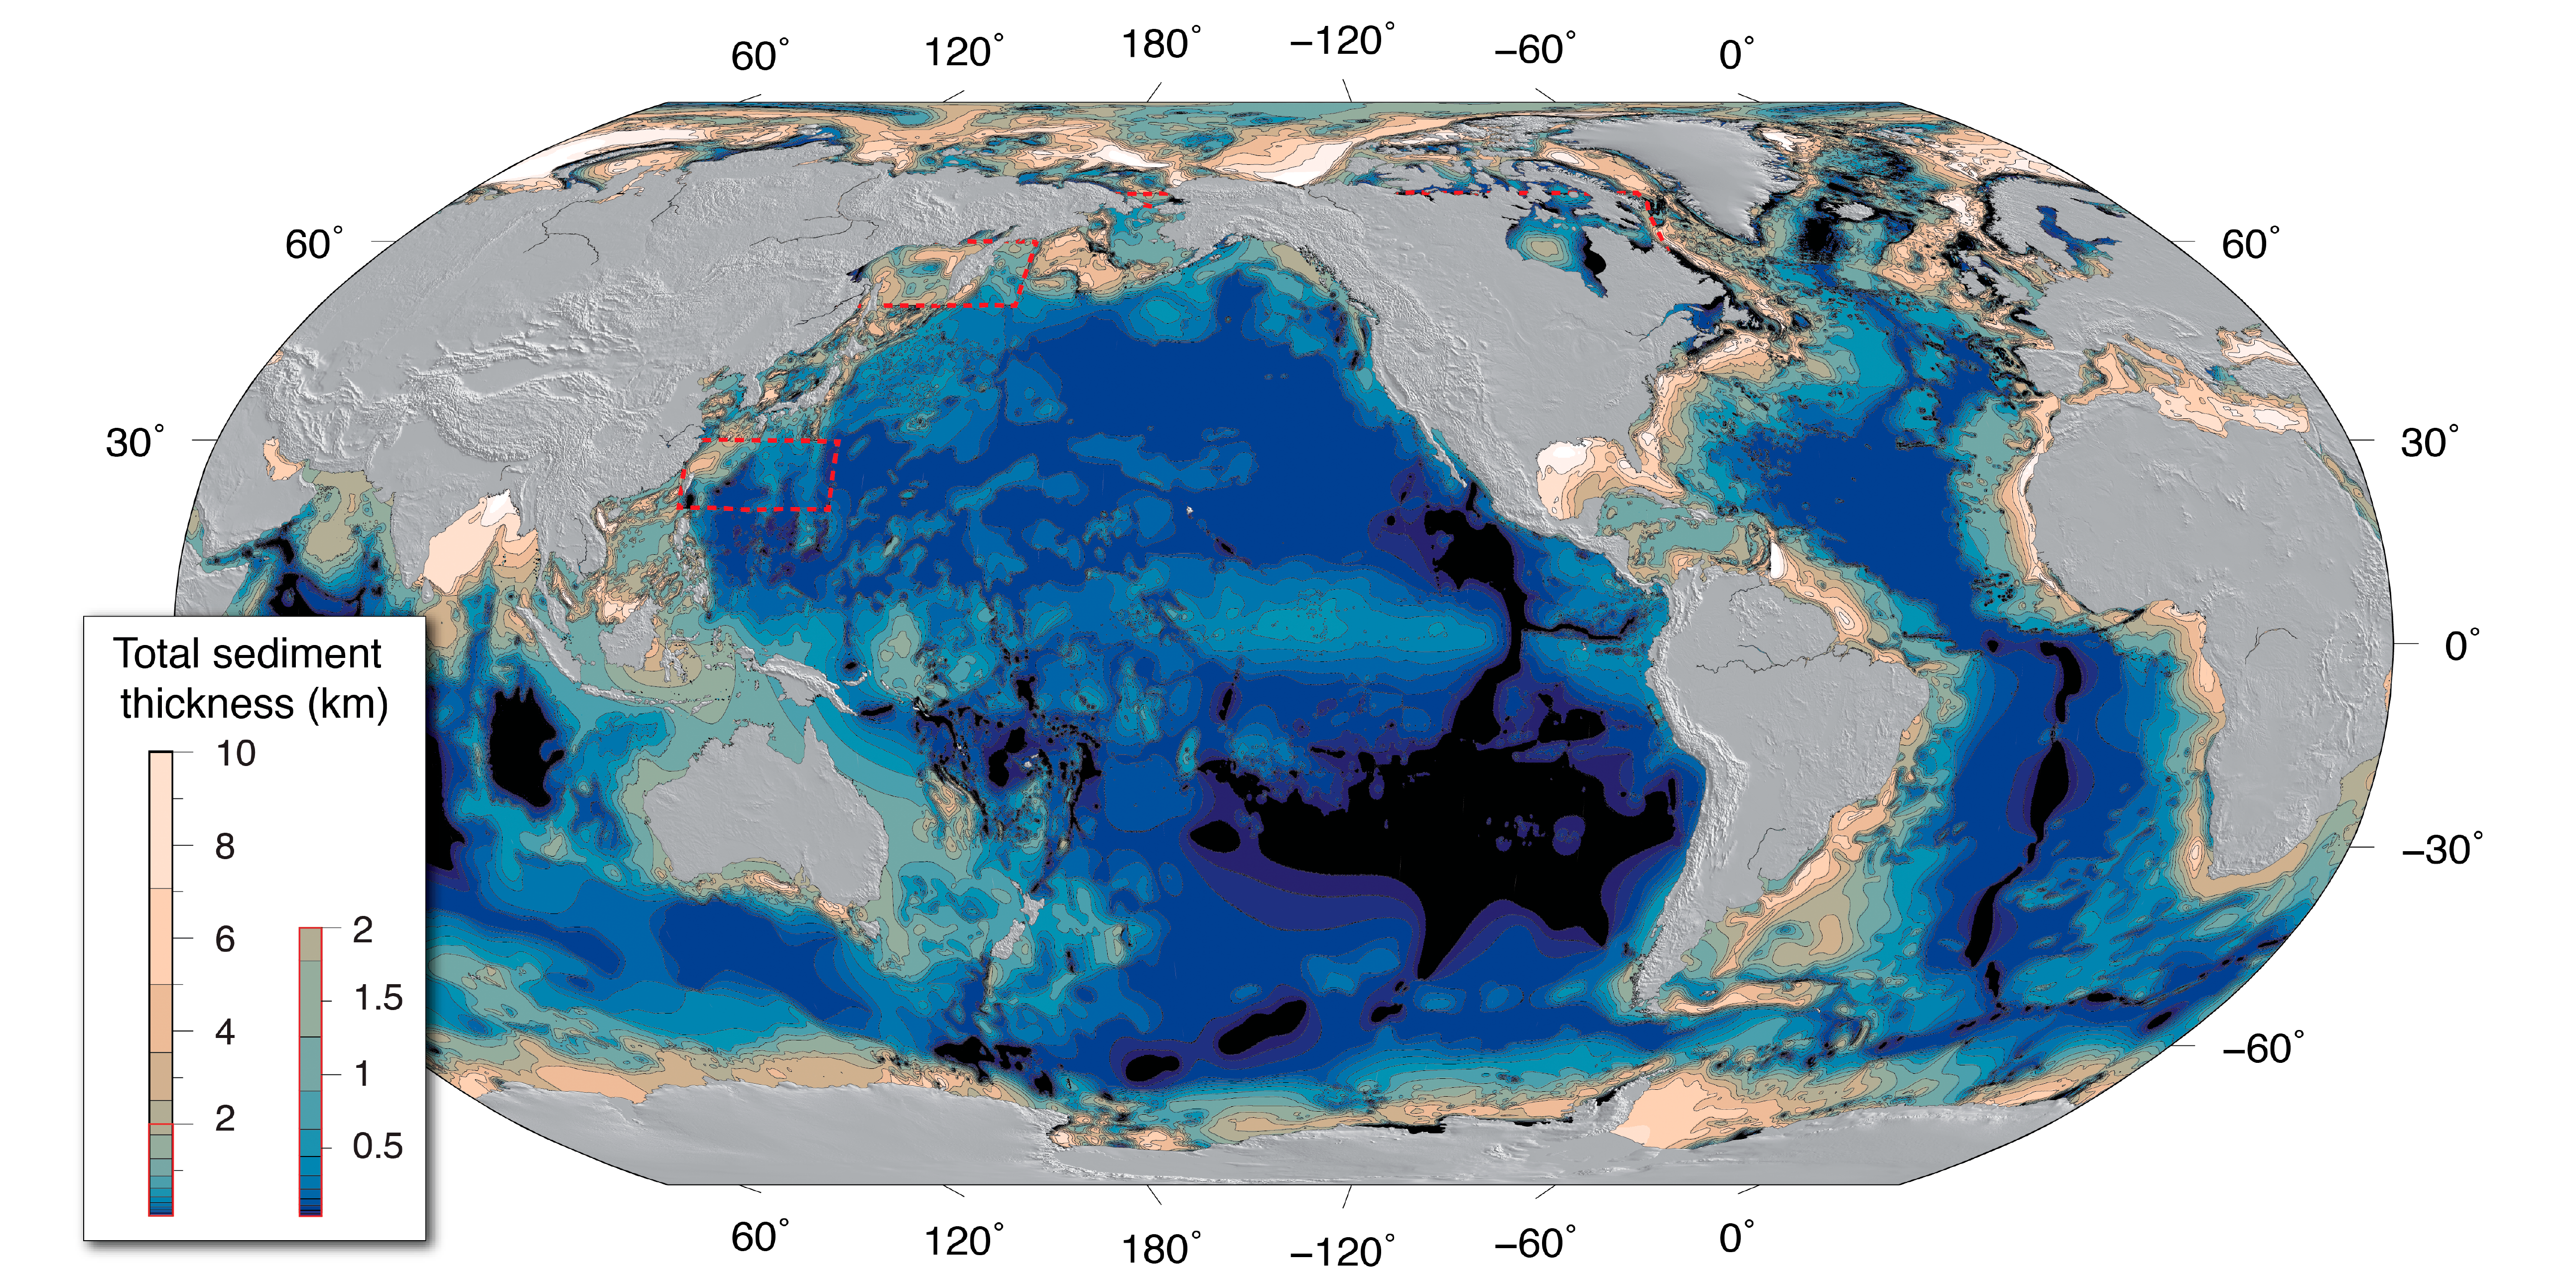 World map with ocean basins color-coded according to the sediment thickness on the ocean floor; the thickest sediment is tan in color with a darker gradient for thinner sediment, while the thinnest sediment id deep blue in color with a lighter gradient for thicker sediment. The sediment is thickest around the ocean margins near the continents while the sediment is thinnest away from the continents in the deepest ocean basins and trenches.